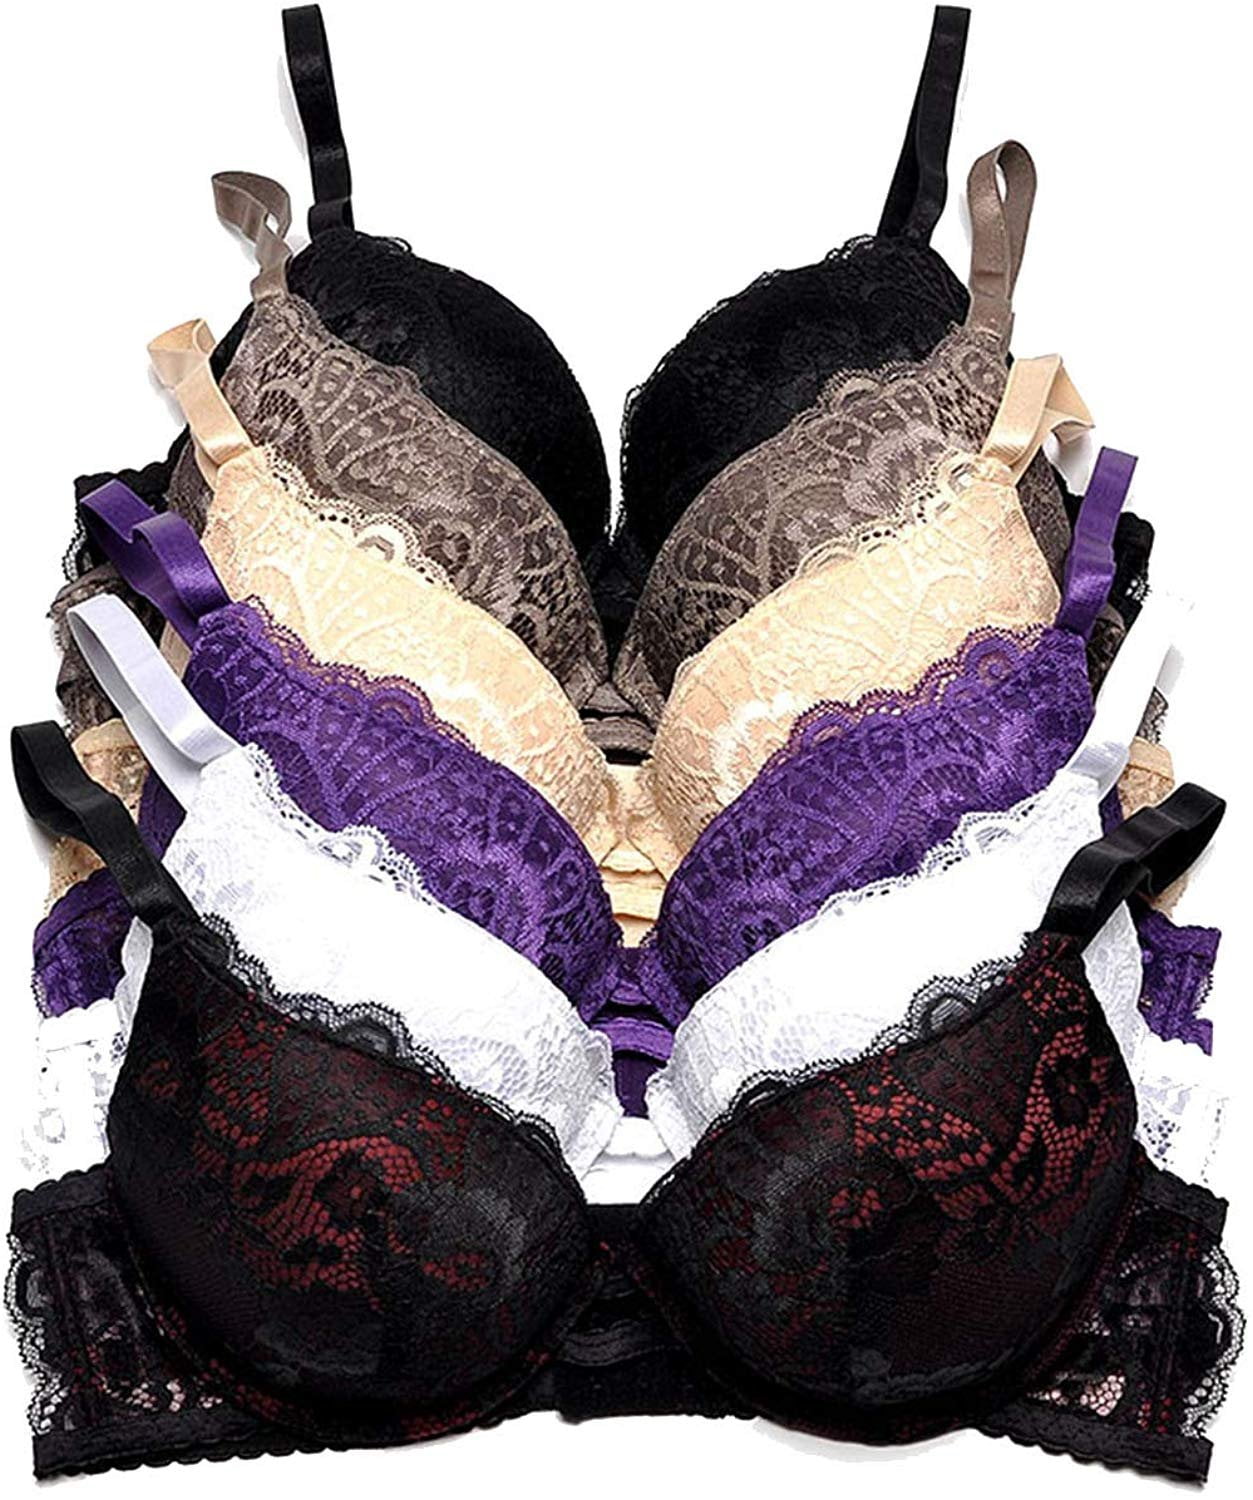 🔥🔥🔥🔥 Luxuuryyyyyyyy😍 Well padded push up bra Brand: New look🇬🇧 .  Size: 34B✓34C❌ Price: 11,999 (discounted)